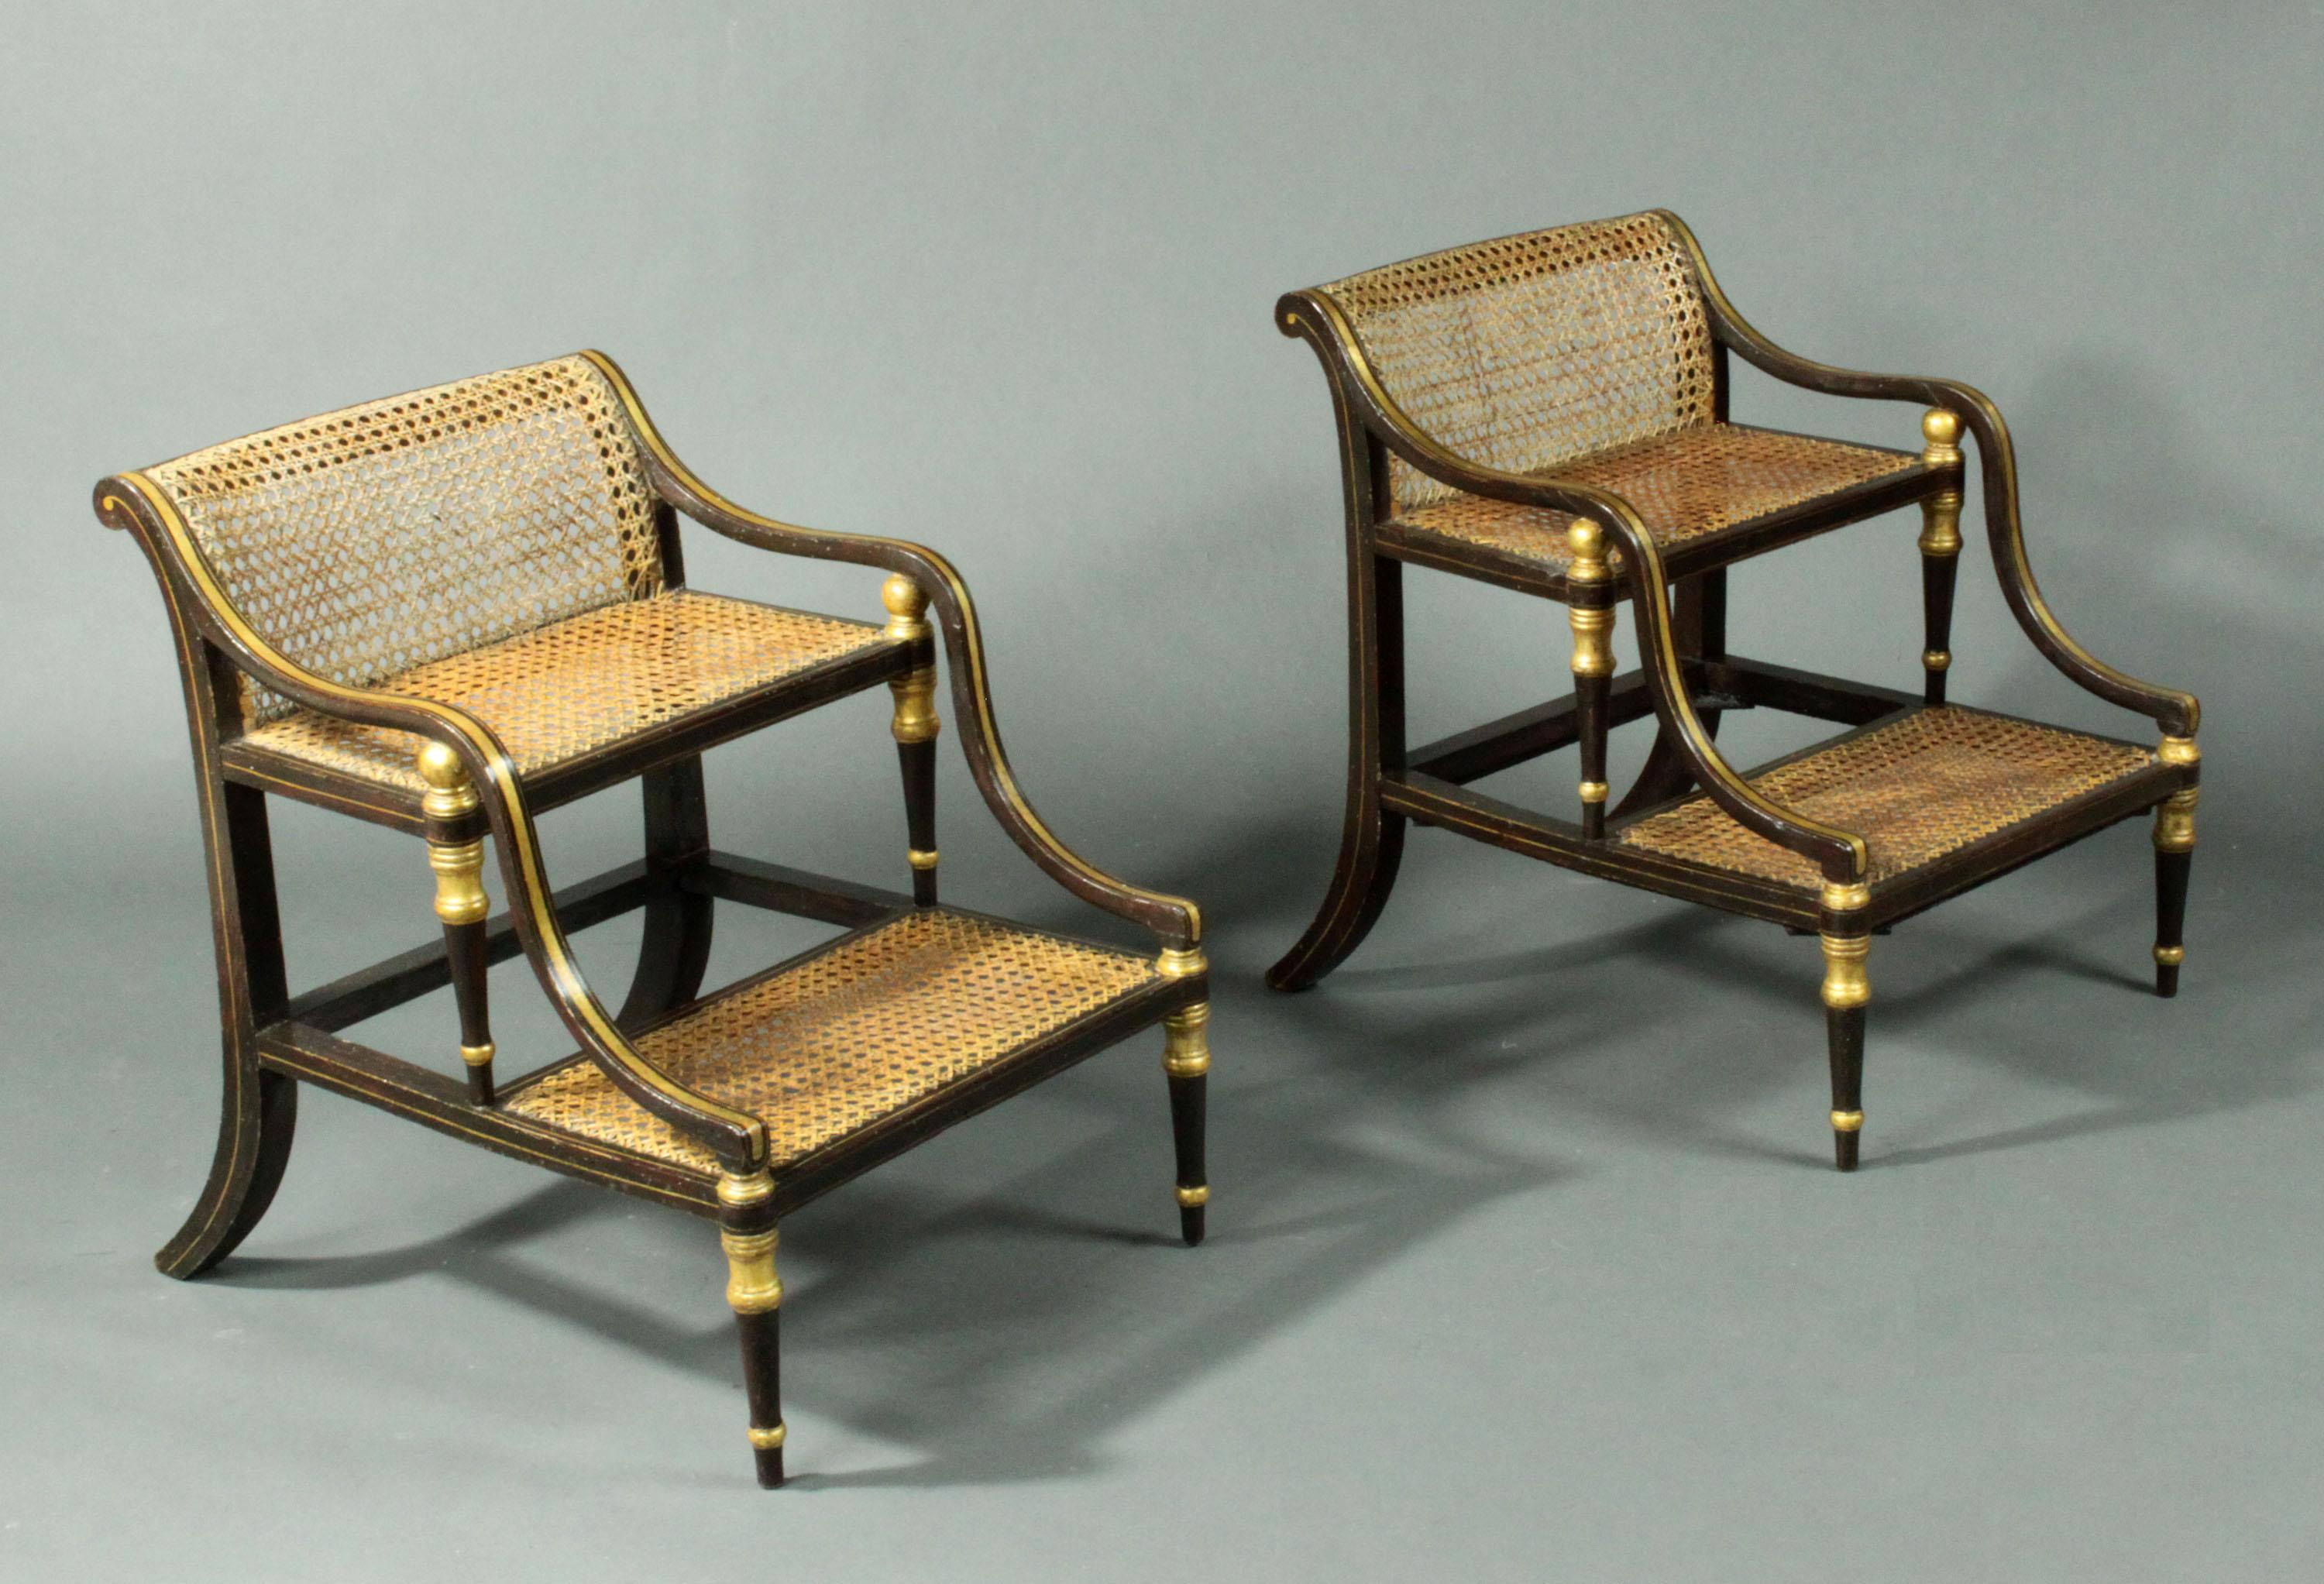 A rare and elegant pair of Regency simulated rosewood bedsteps; could be used as interesting occasional tables in a drawing room. The green striped cushions are covered in hard-wearing horsehair fabric.